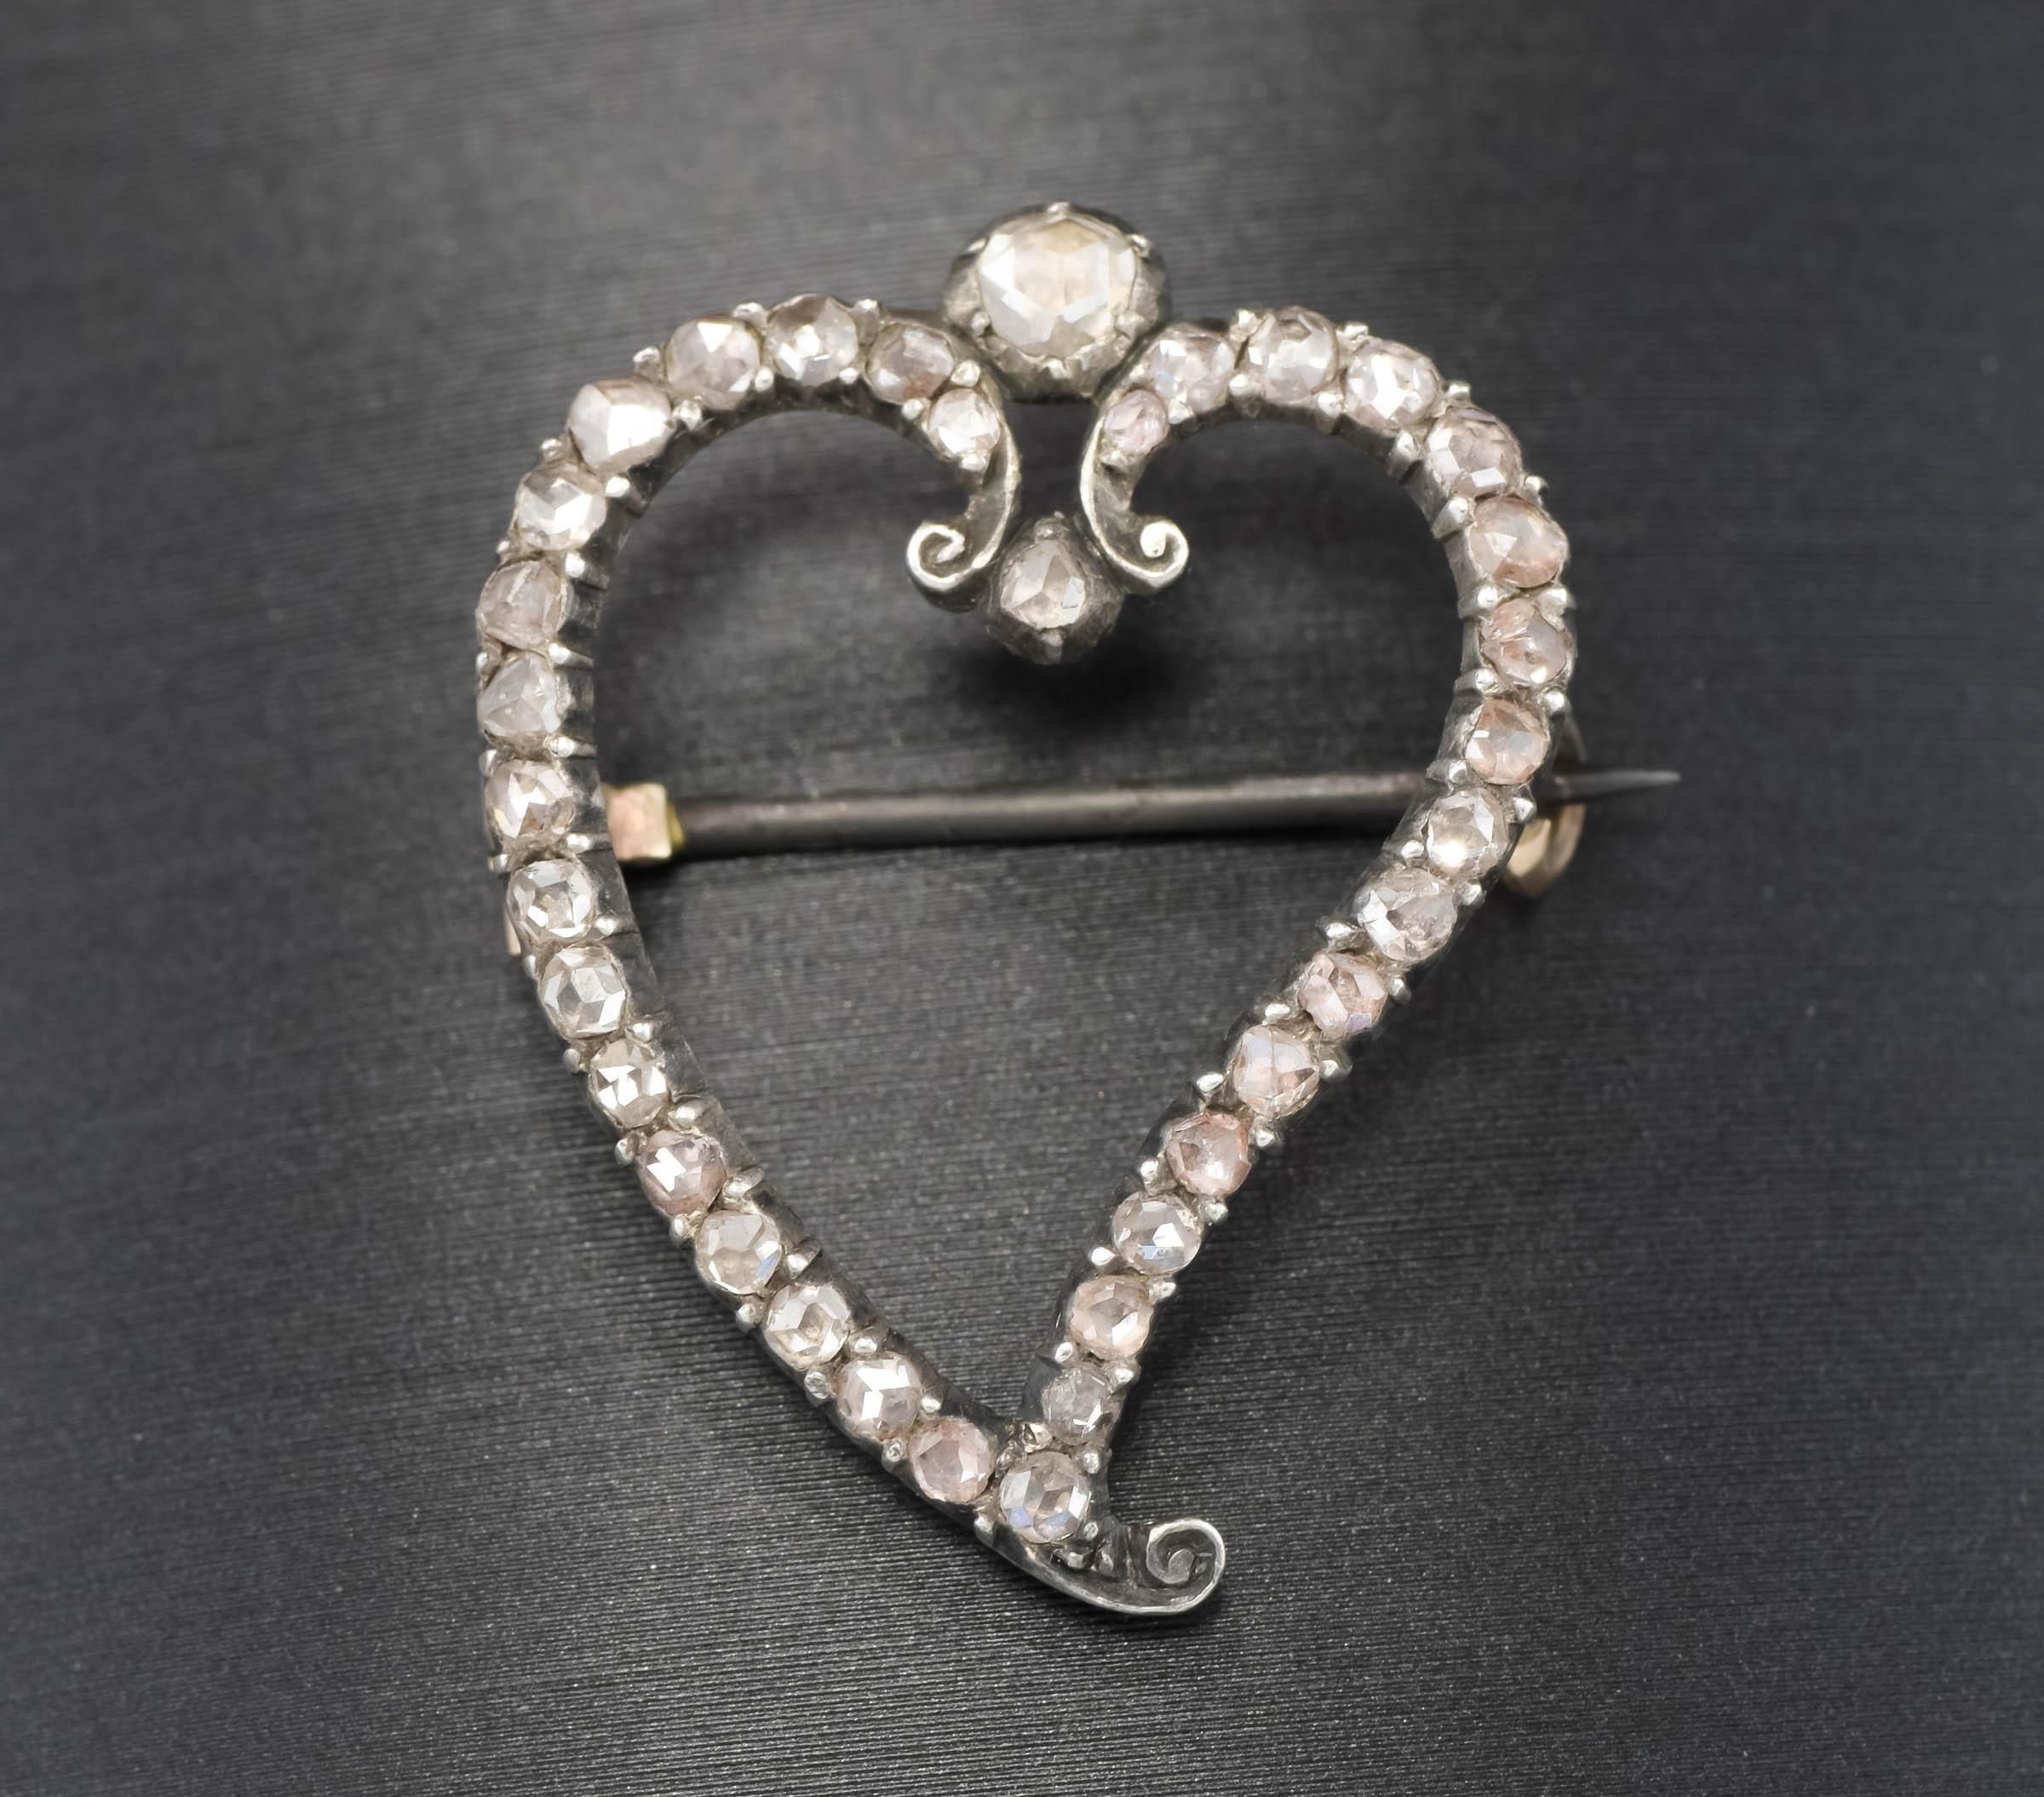 Offered is a very lovely antique rose cut diamond heart brooch from the Georgian period.  This type of heart is referred to as a 